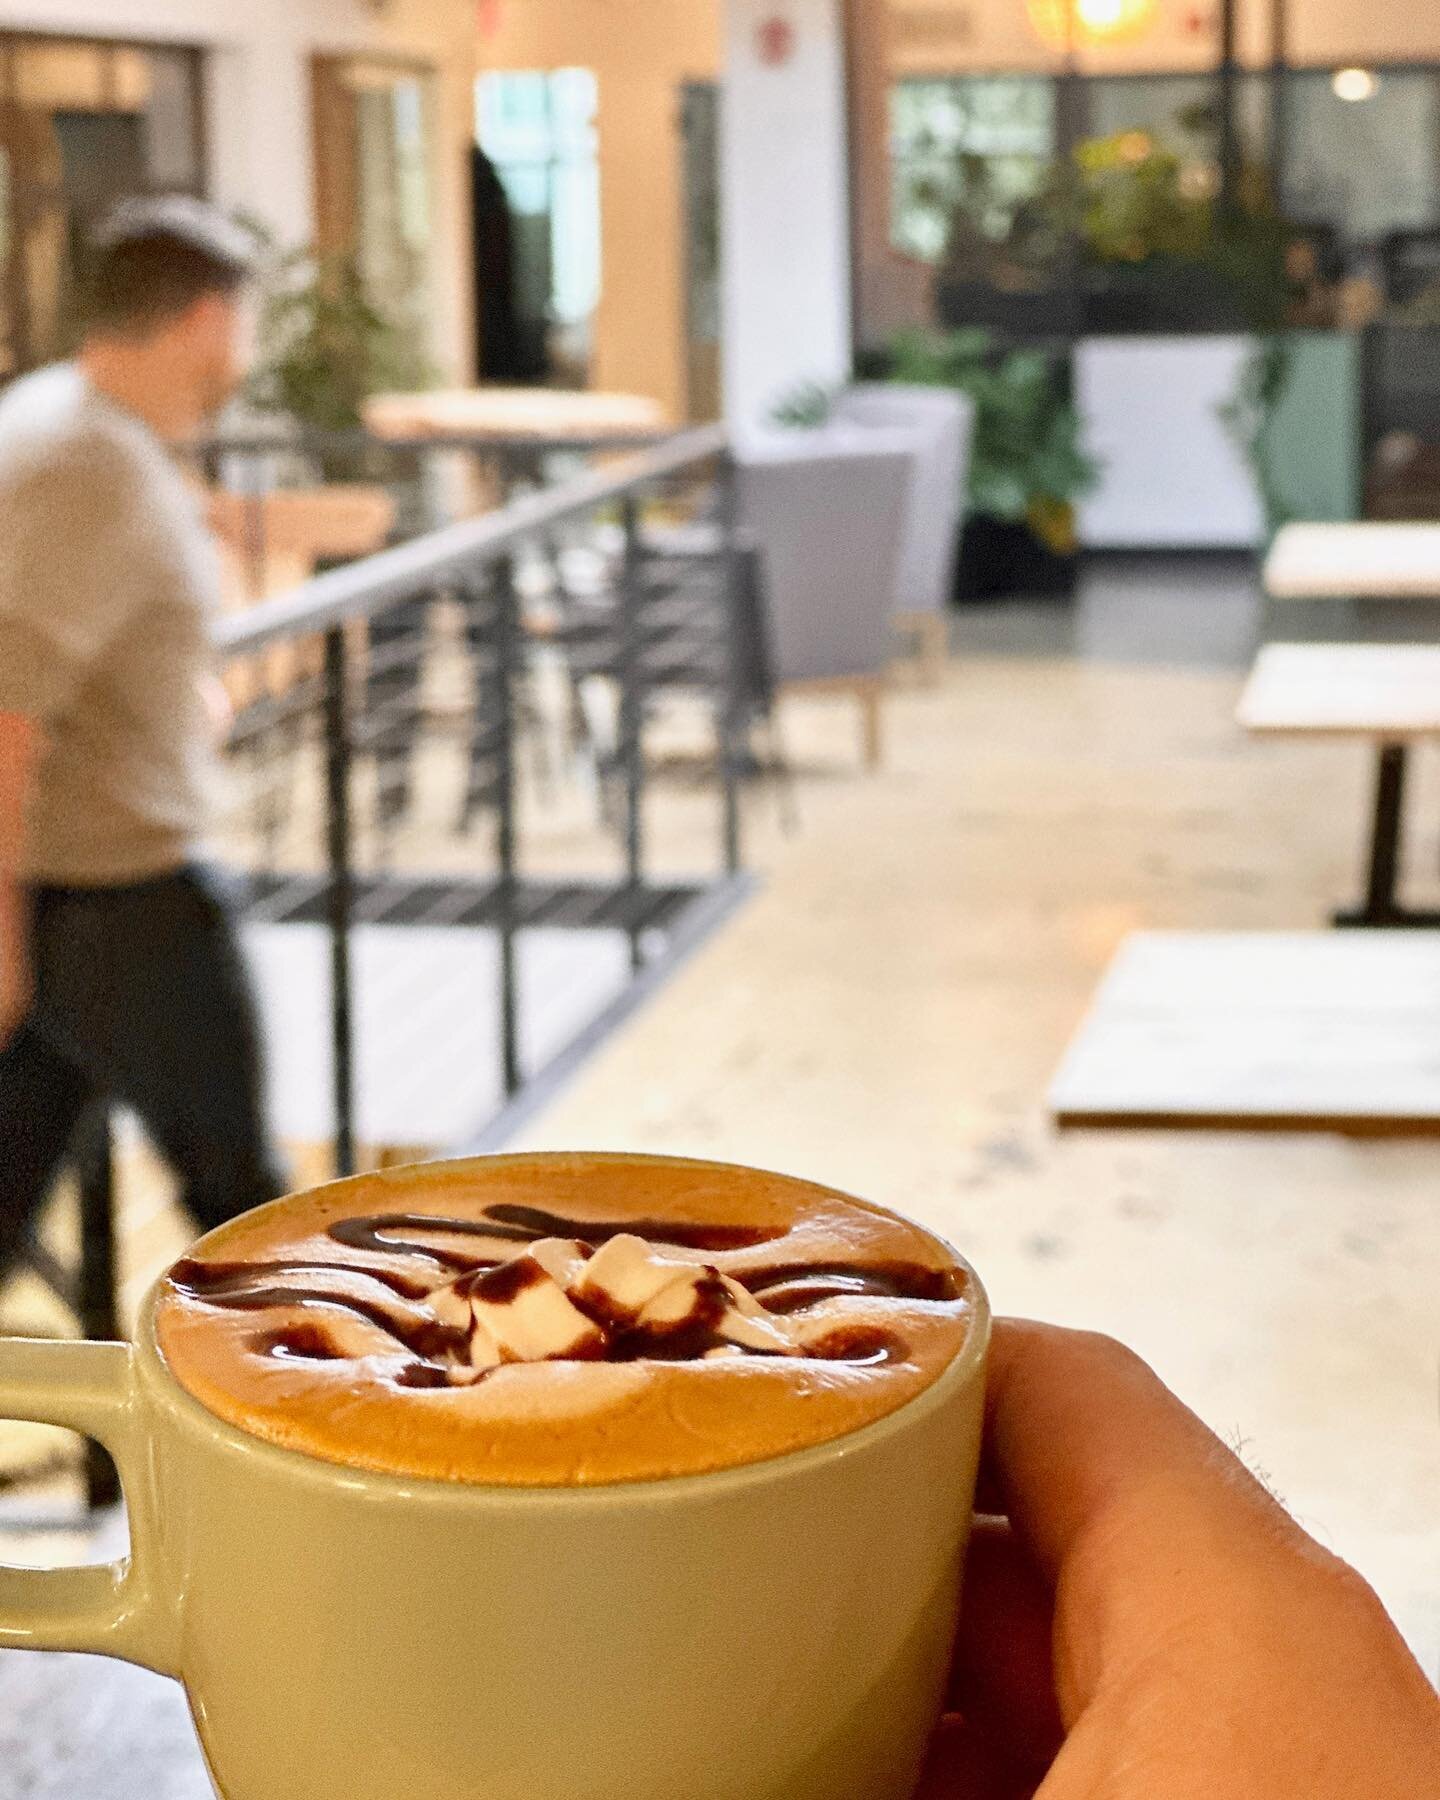 Having an afternoon sweet craving? 

Head to the 4th floor and enjoy a latte 😋

#downtownraleigh #downtownraleighnc #coworking #coworkingspace #nc #raleigh #downtownraleighvenue #coffeetime #latteartist #sweettooth #nccoworking #ncbusiness #ncbusine